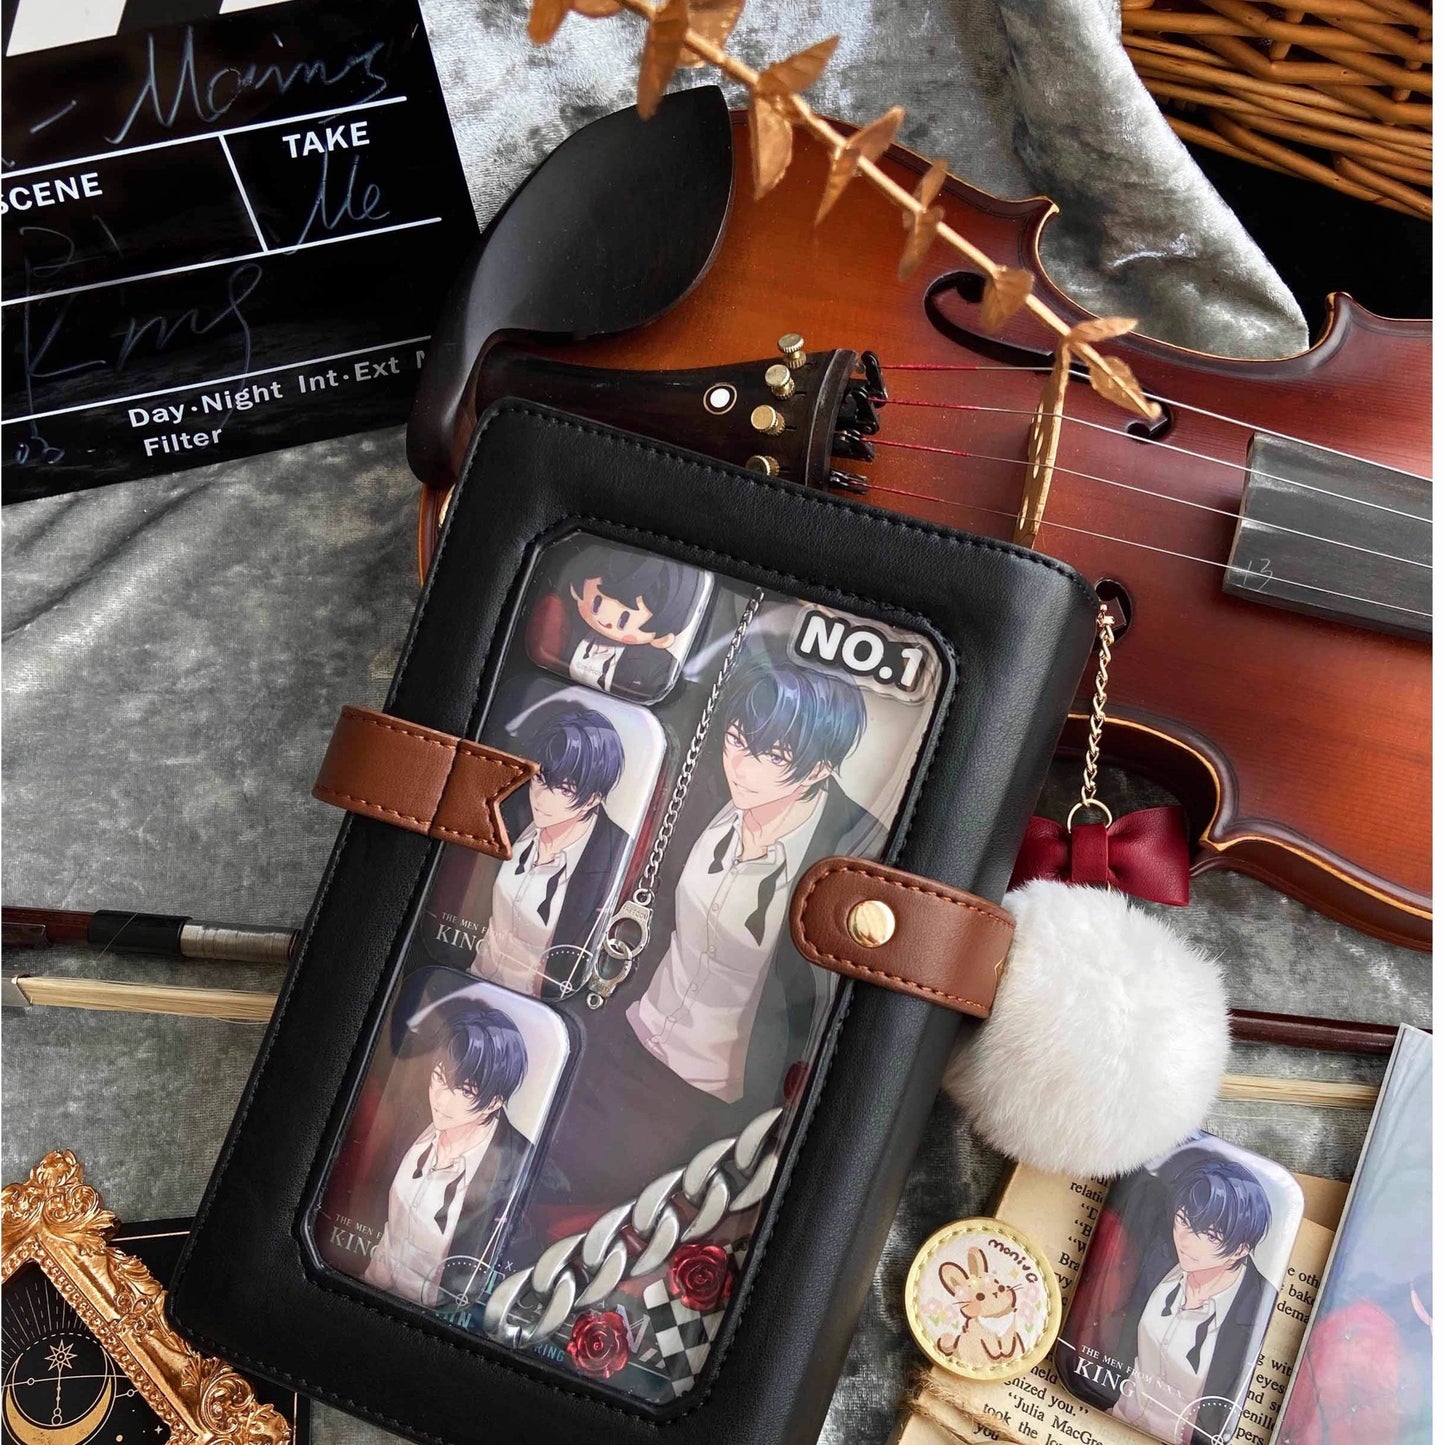 Diary Wallet Pochette Ita Bag All 7 colors